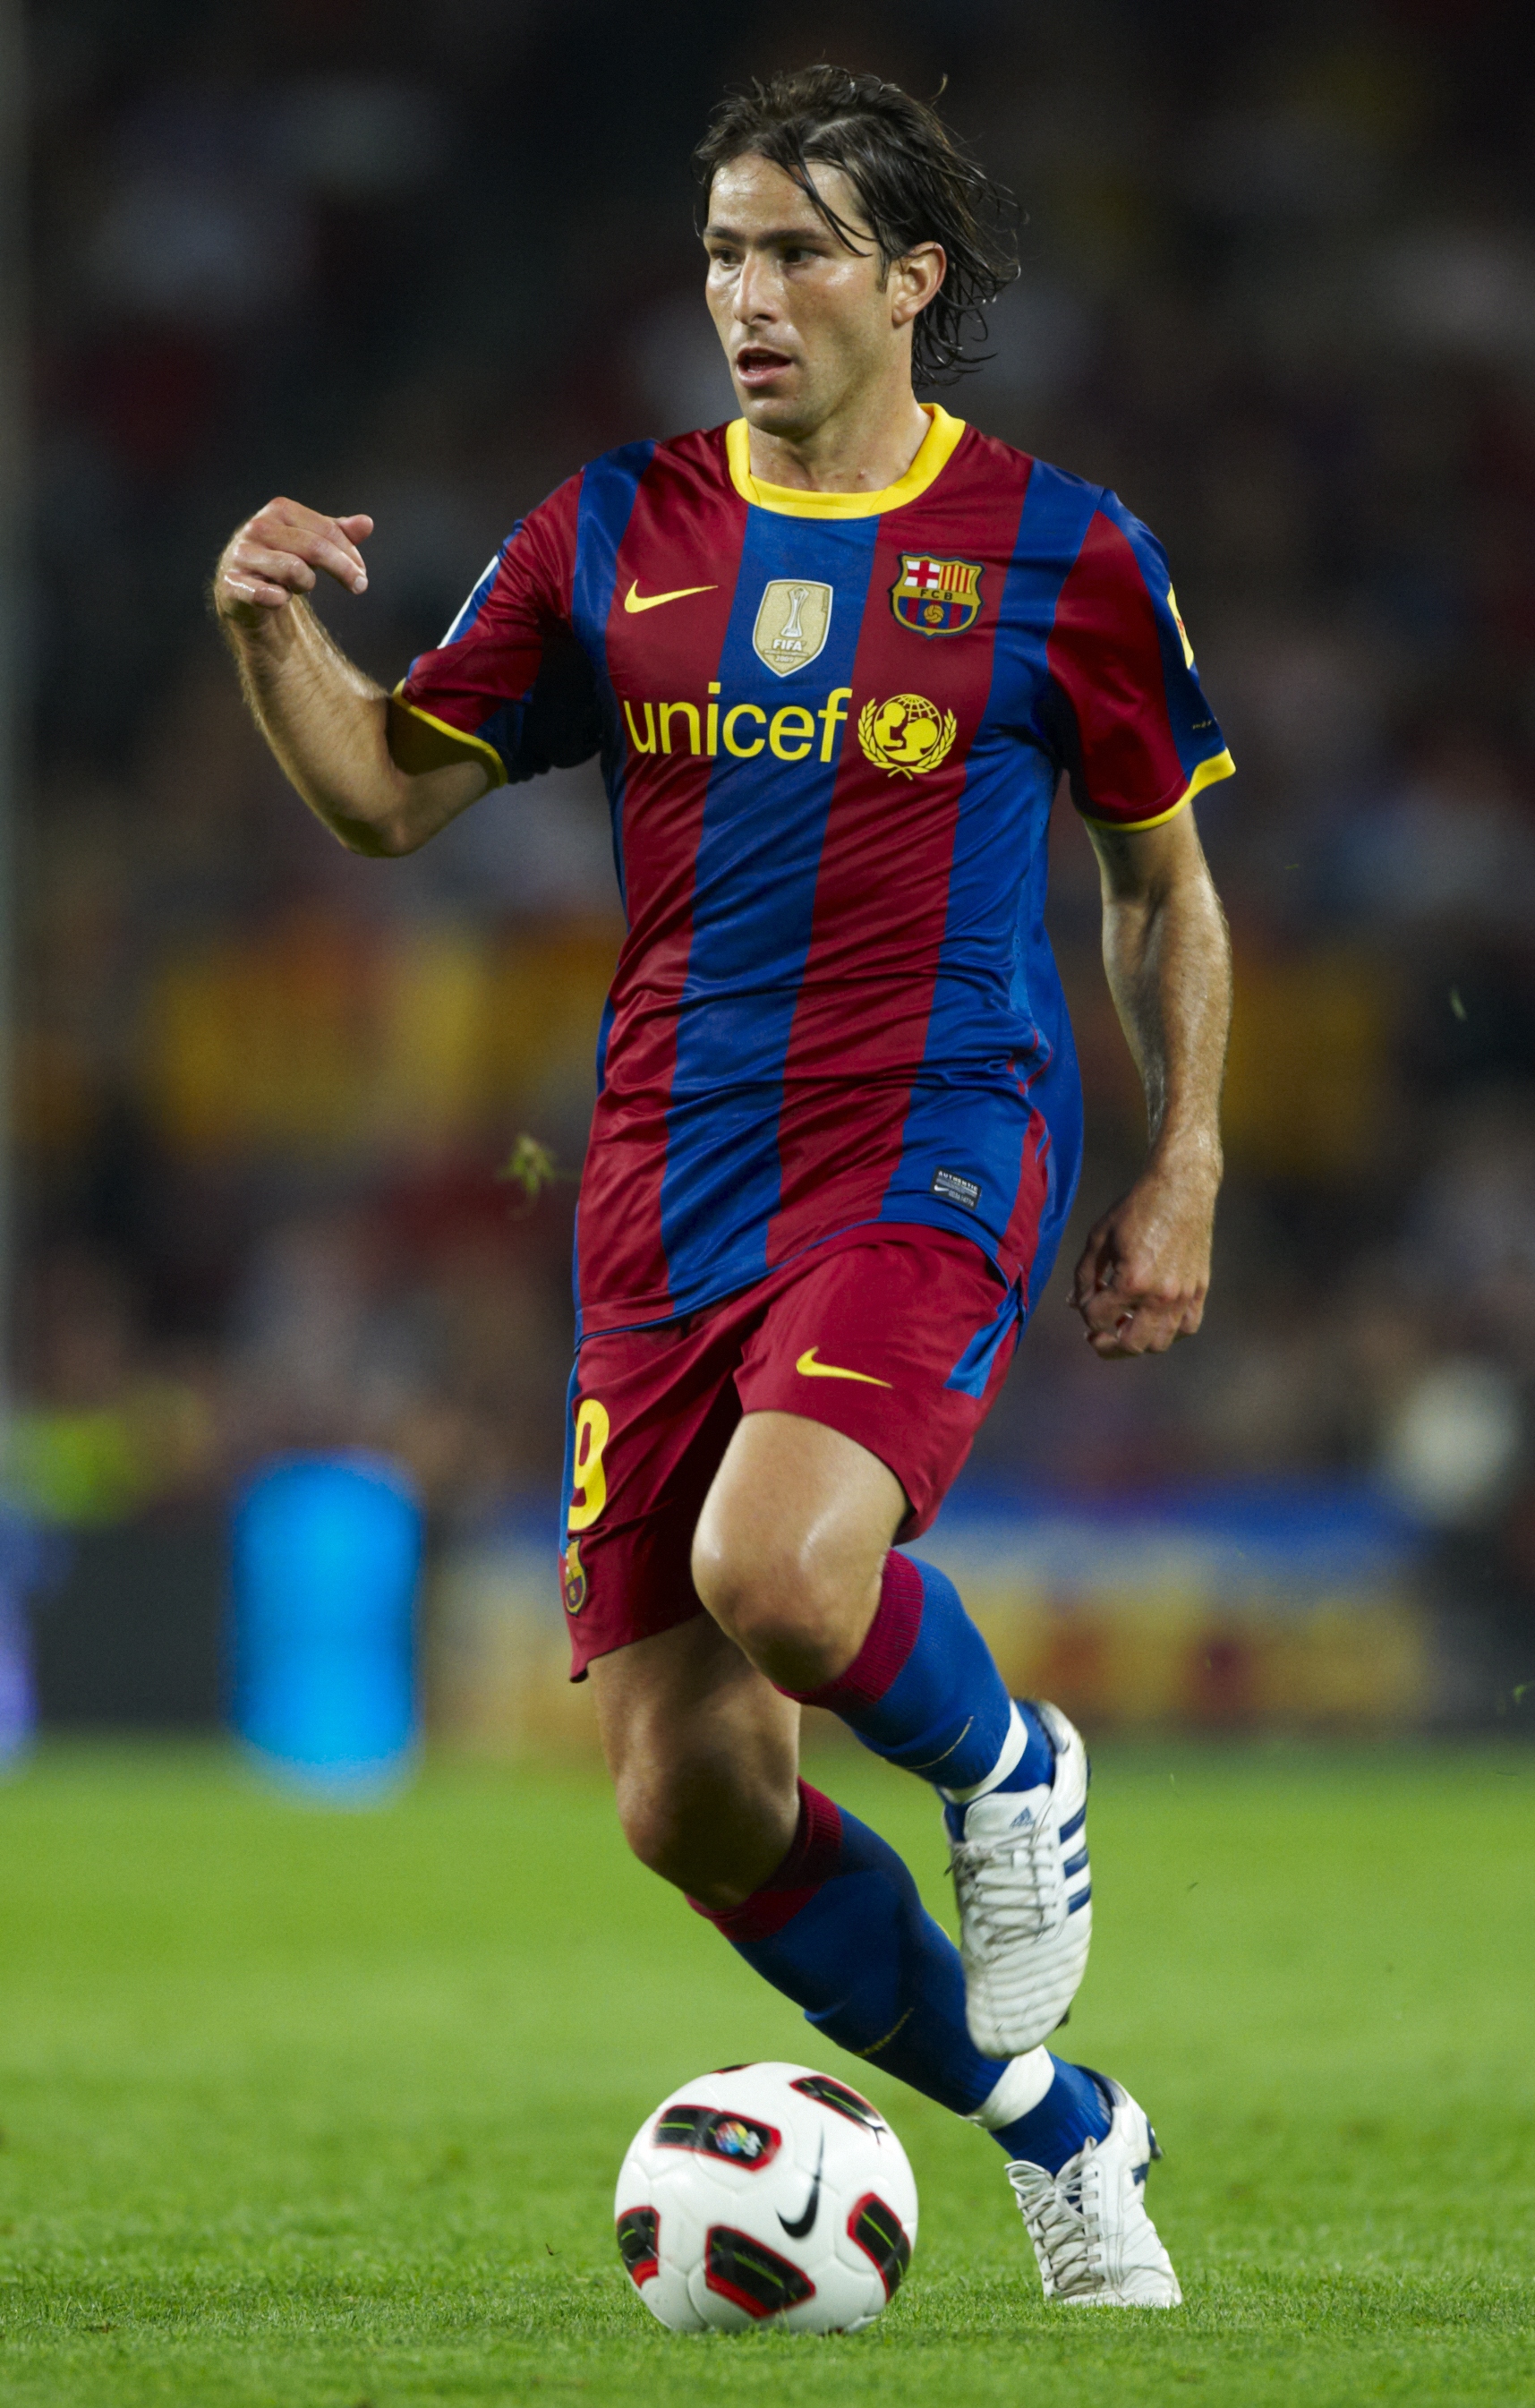 BARCELONA, SPAIN - SEPTEMBER 22:  Maxwell of Barcelona runs with the ball during the La Liga match between Barcelona and Sporting de Gijon at Nou Camp on September 22, 2010 in Barcelona, Spain. Barcelona won 1-0.  (Photo by Manuel Queimadelos Alonso/Getty